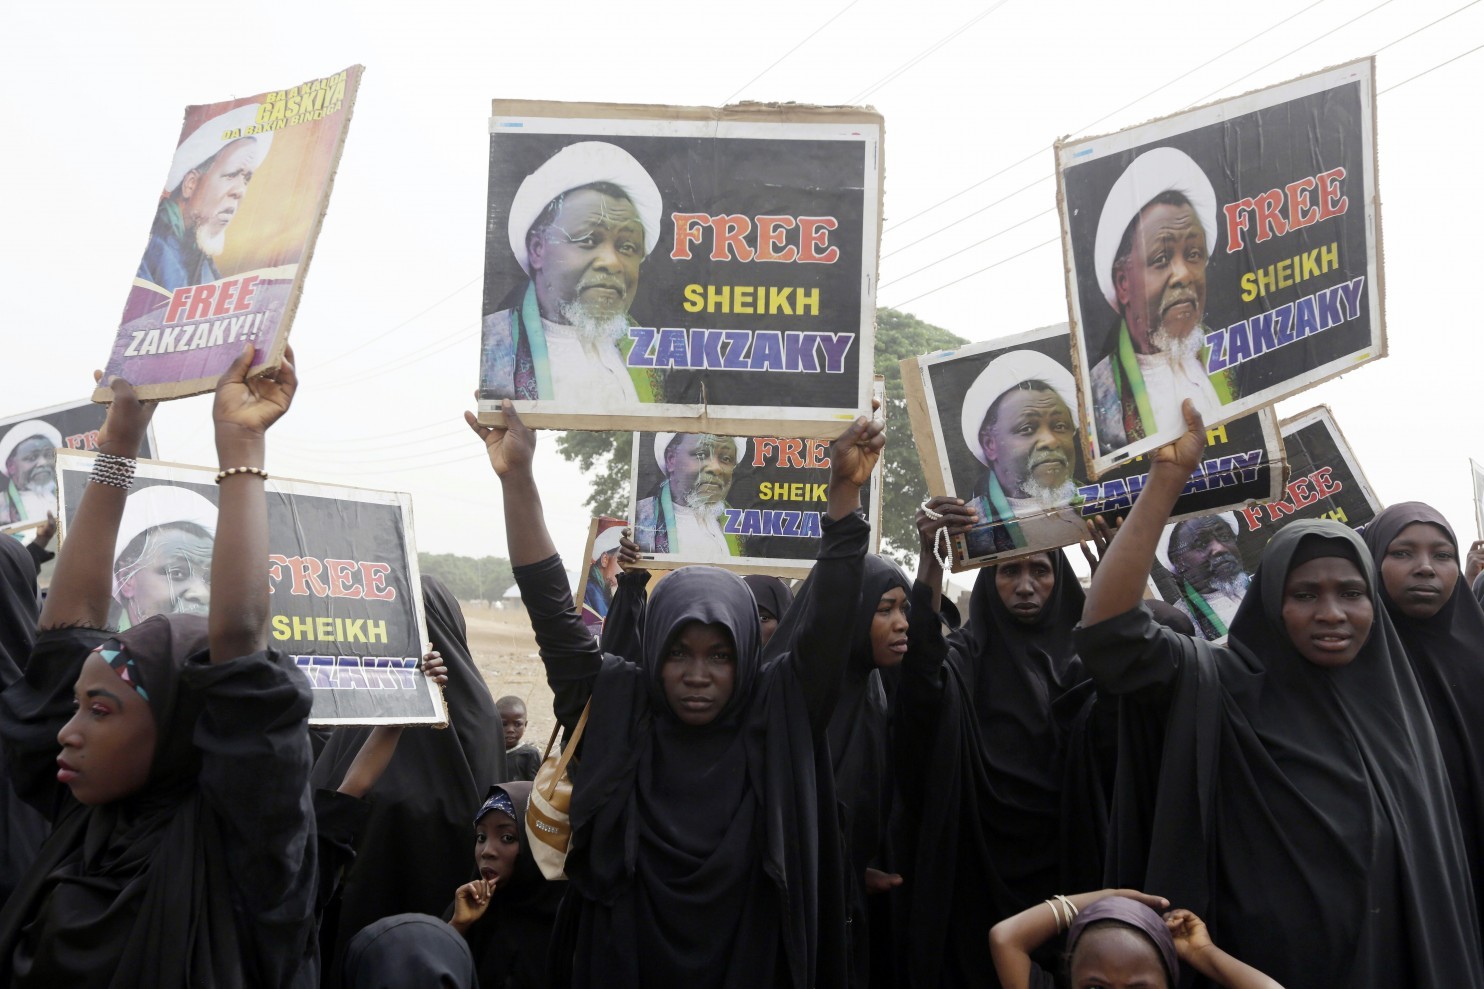 FILE- In this Friday April 1, 2016 file photo, Nigerian Shiite Muslims take to the street to protest and demanded the release of Shiite leader Ibraheem Zakzaky in Cikatsere, Nigeria. Nigeria’s army gunned down 348 Shiites in an attack in which one soldier was killed, according to the report of a commission of inquiry published Monday, Aug. 1, 2016 which calls for all those involved in the killings to be prosecuted. (Sunday Alamba, file/Associated Press) 